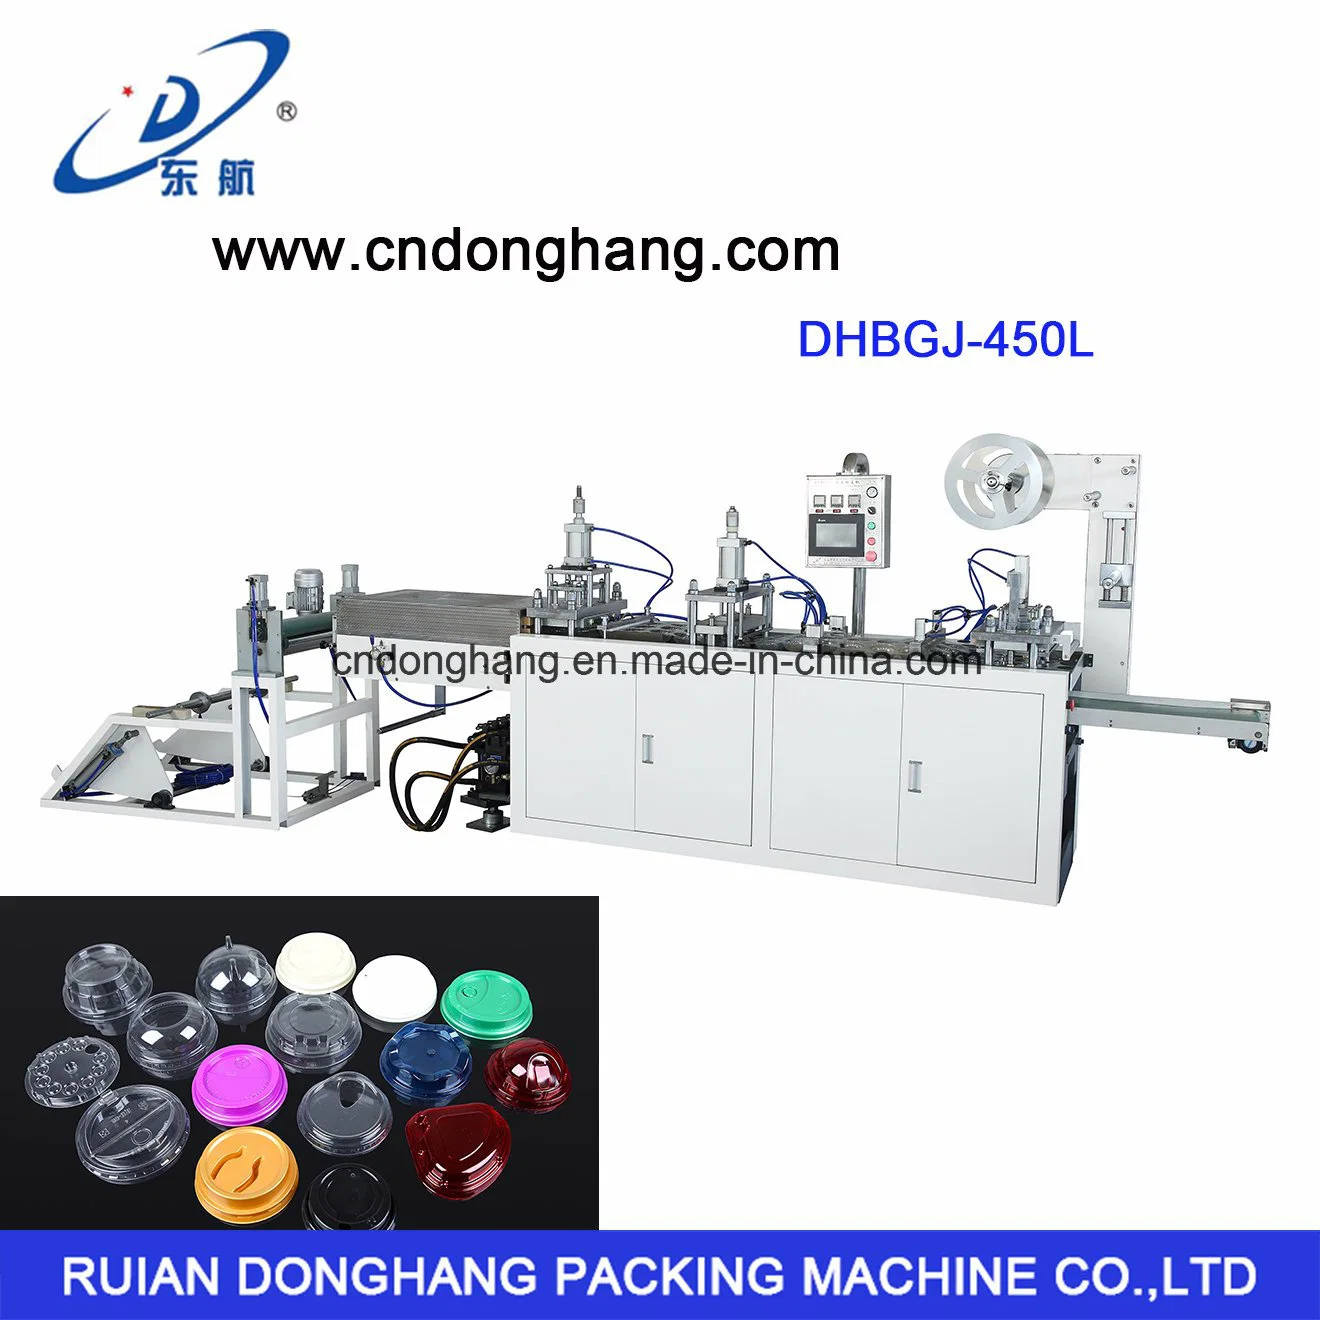 machine de thermoformage Donghang couvercle